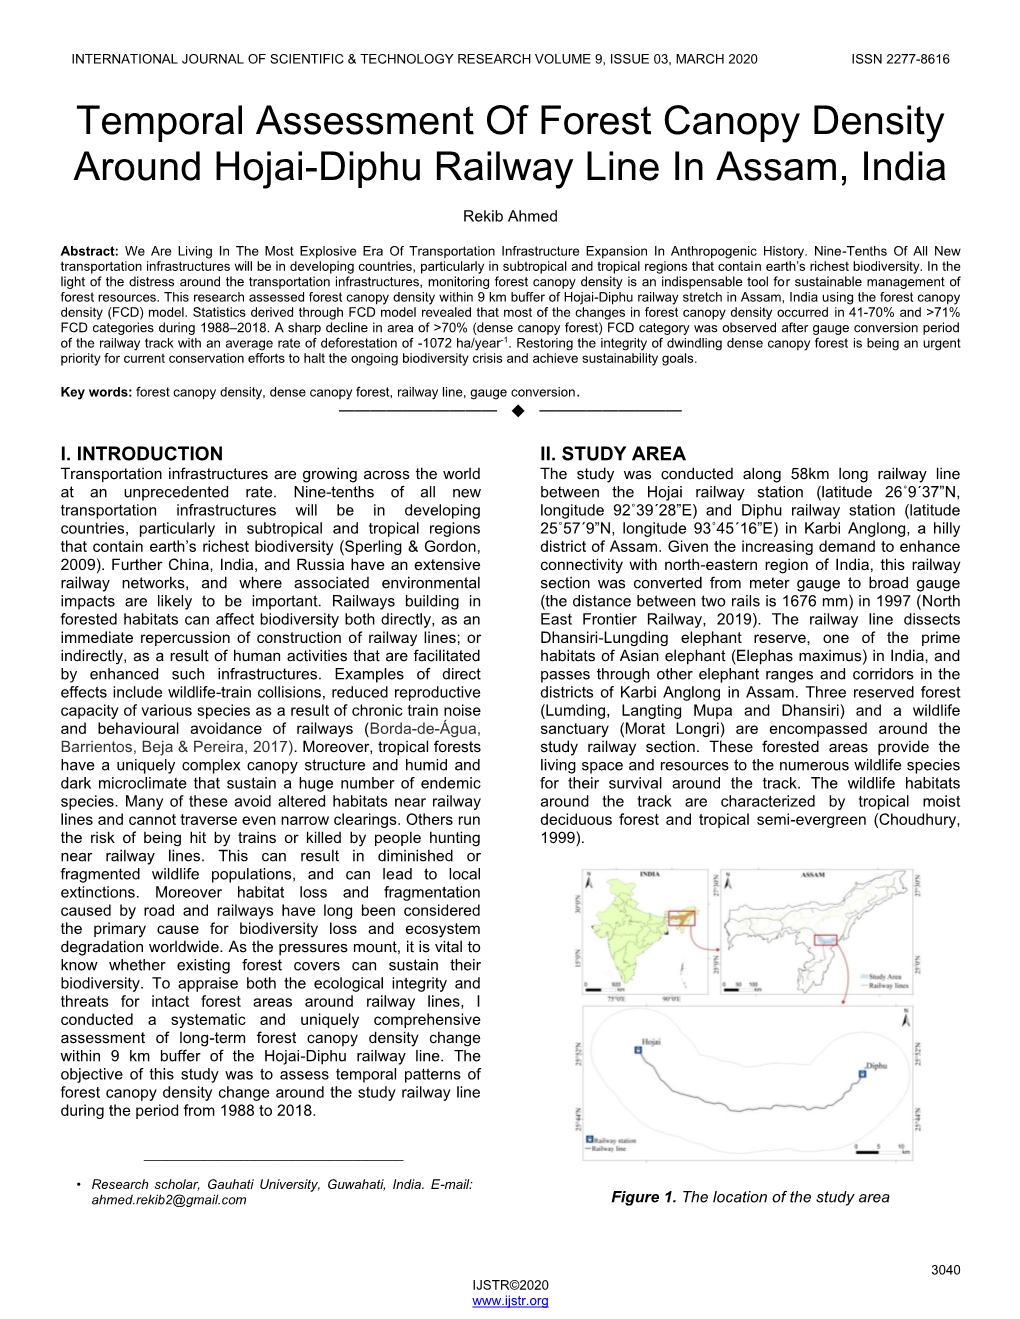 Temporal Assessment of Forest Canopy Density Around Hojai-Diphu Railway Line in Assam, India